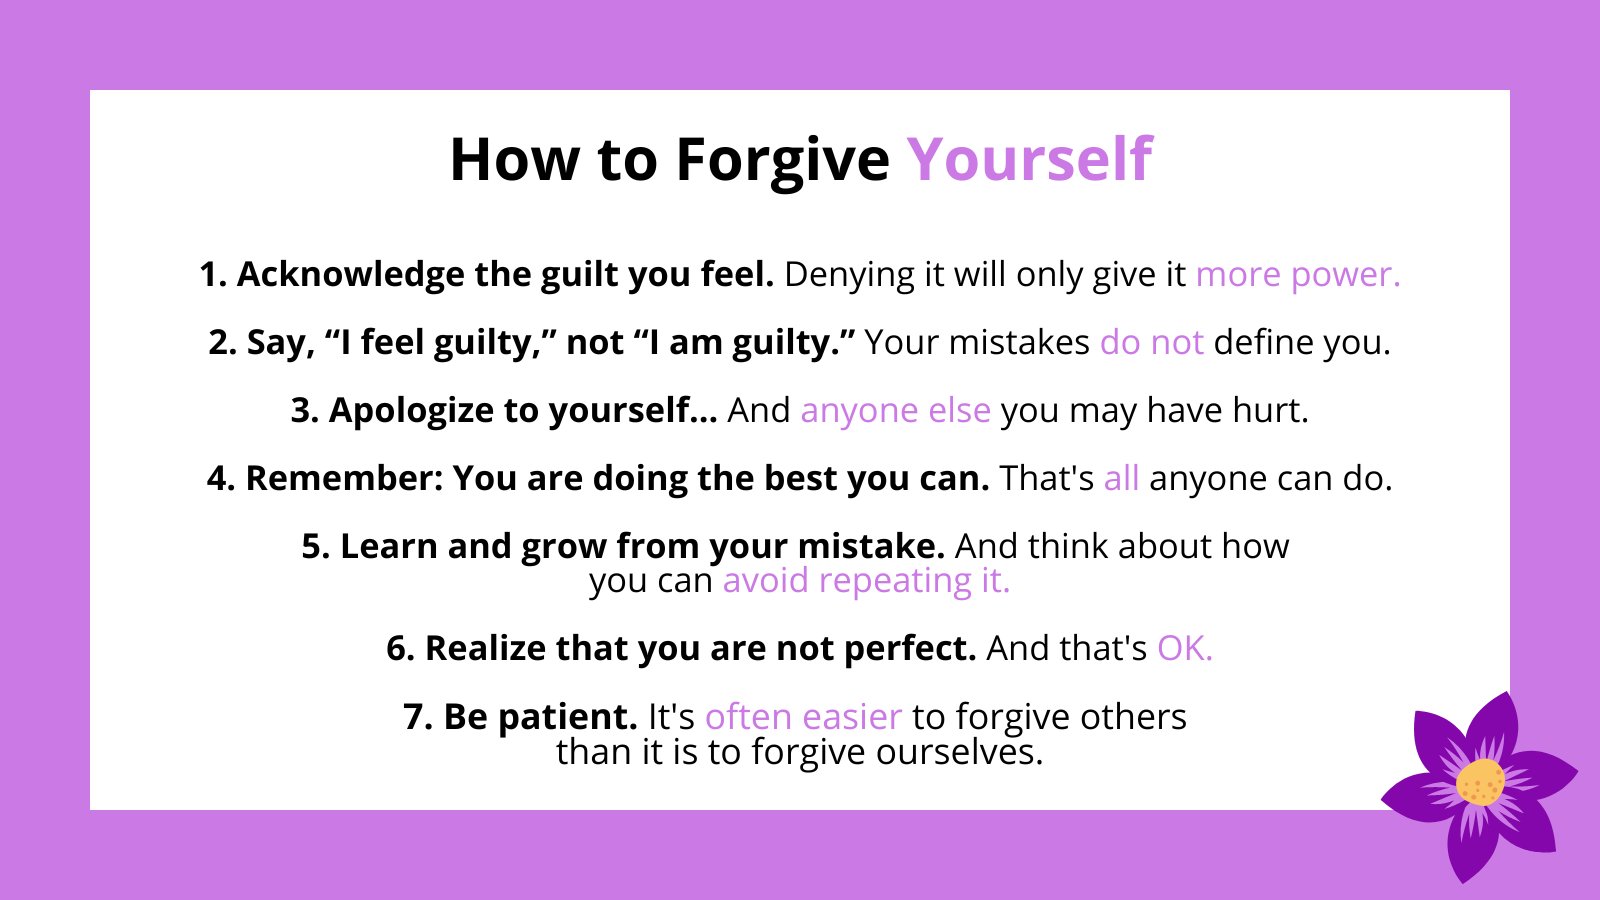 Goodbye, Regret: Forgiving Yourself of Past Mistakes